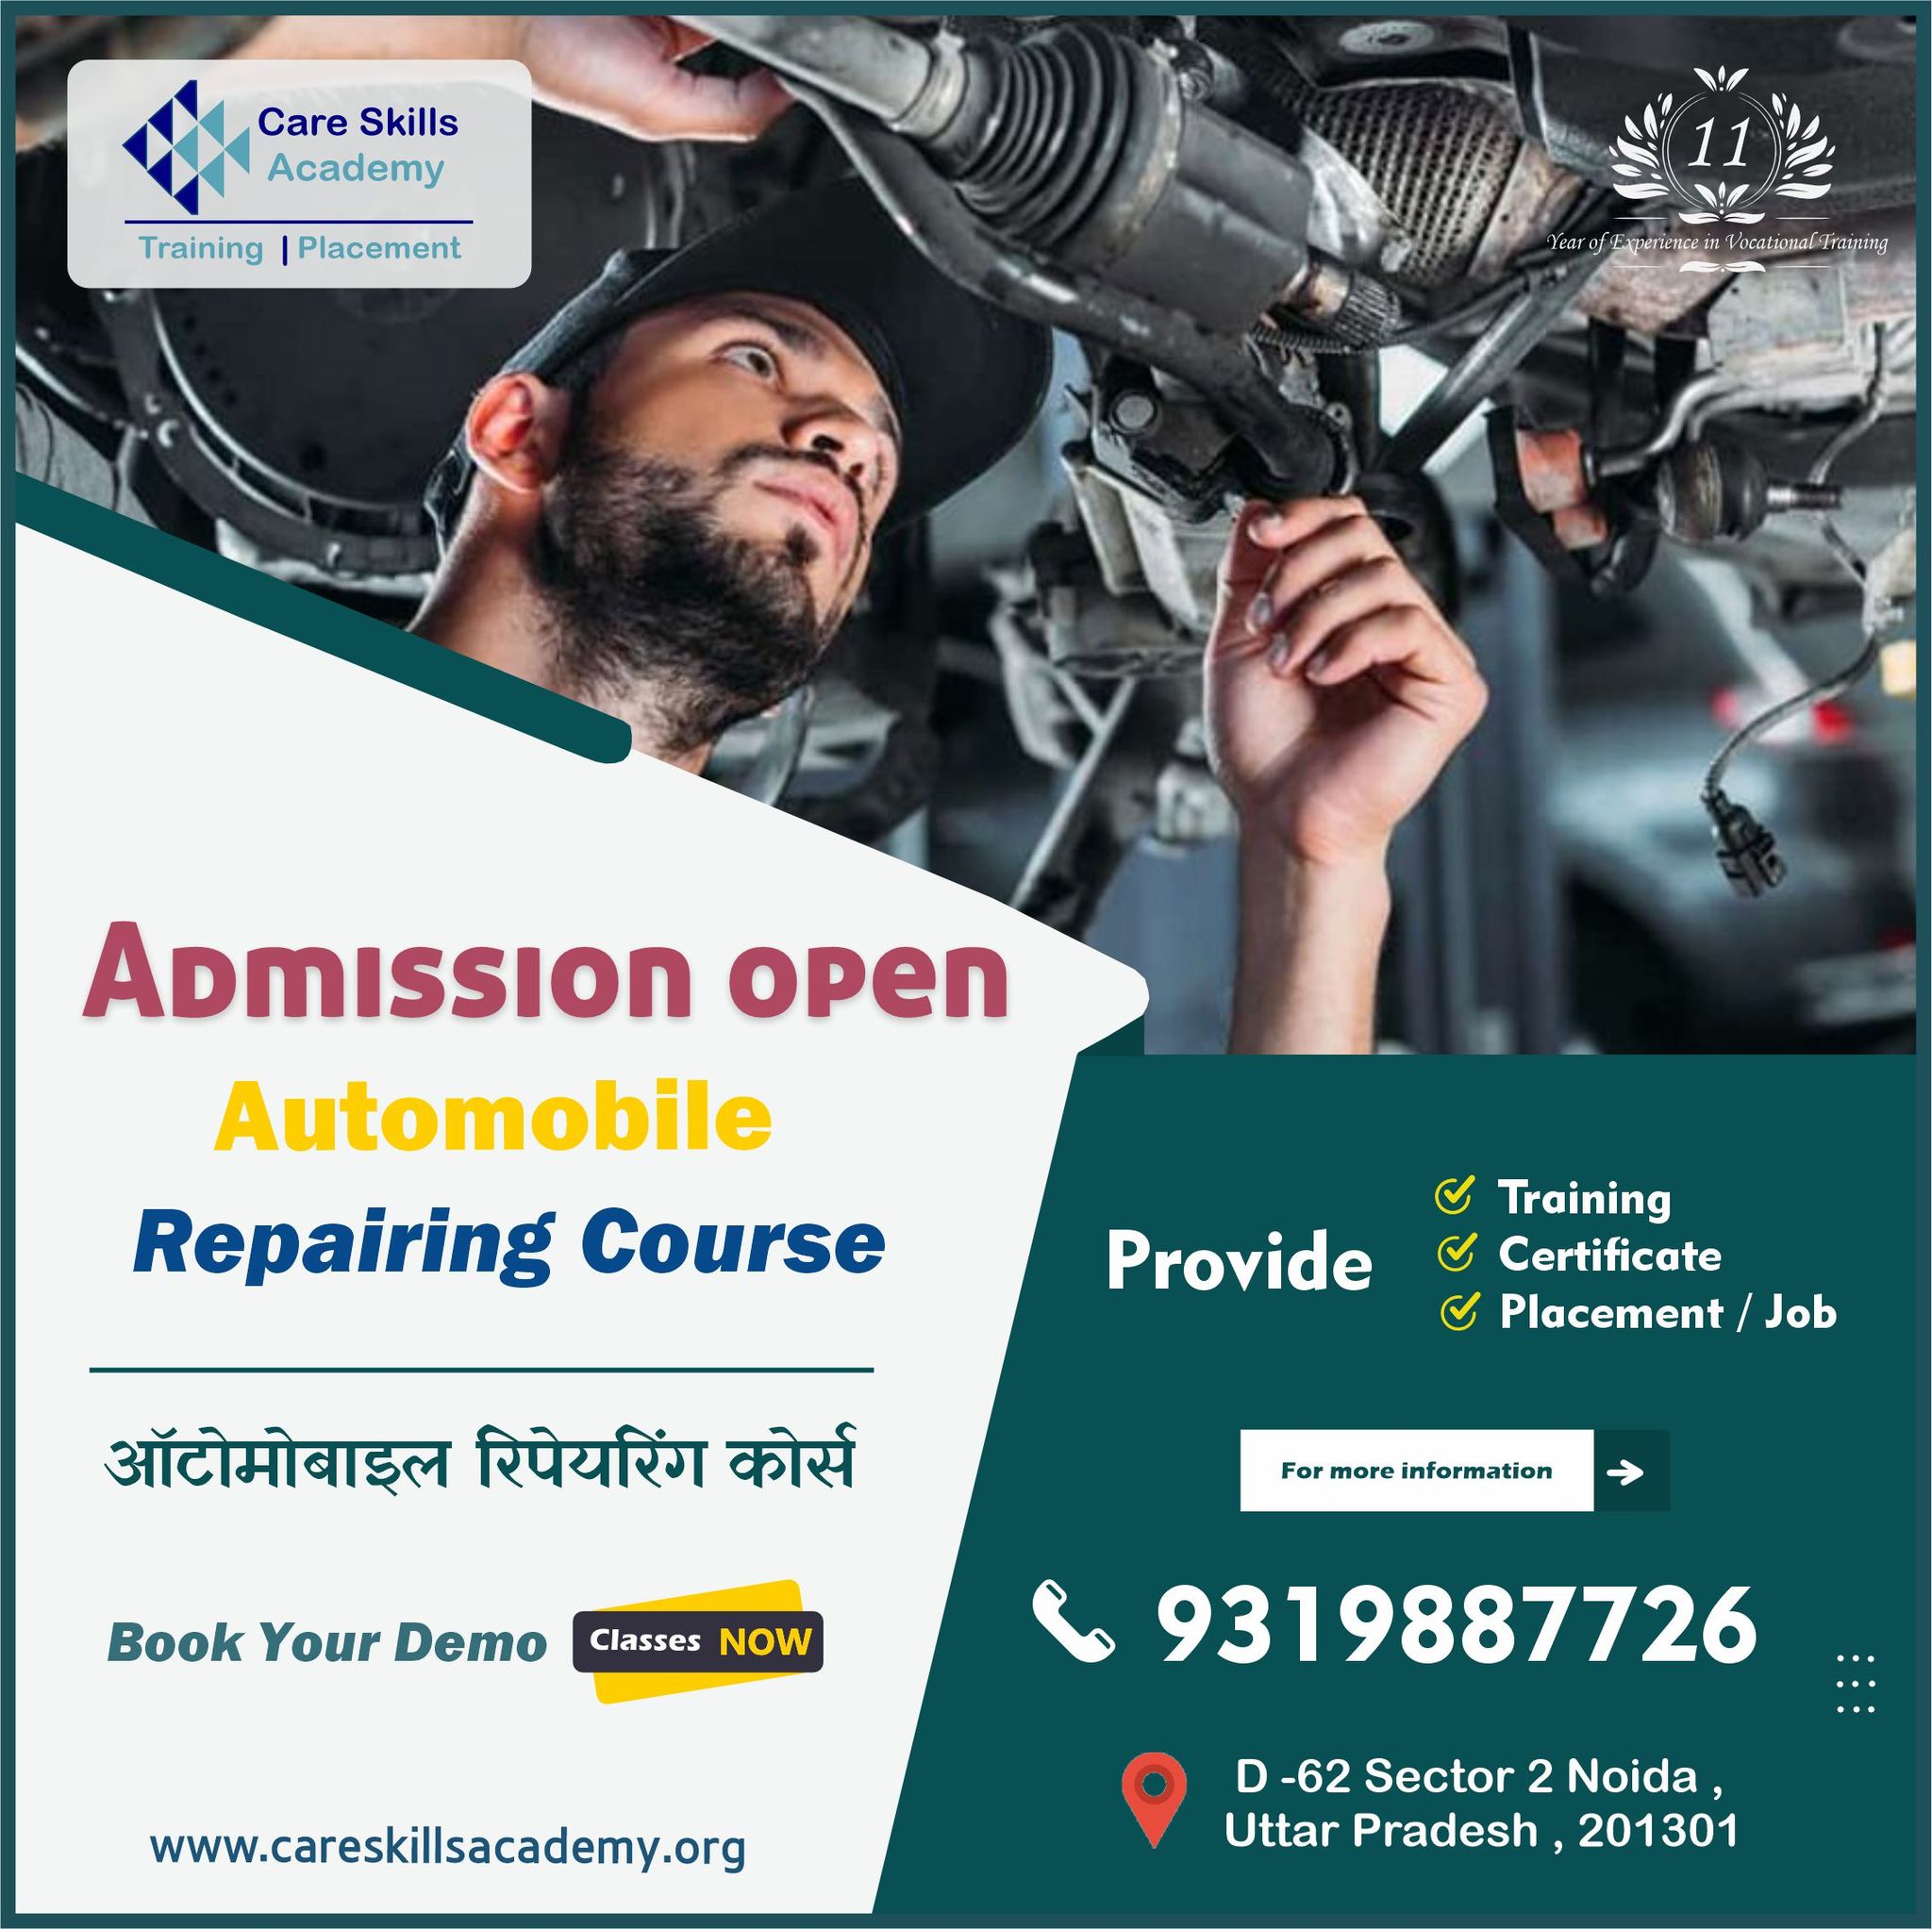 Car Repairing Course at Care Skills Academy: Empowering Your Automotive Skills